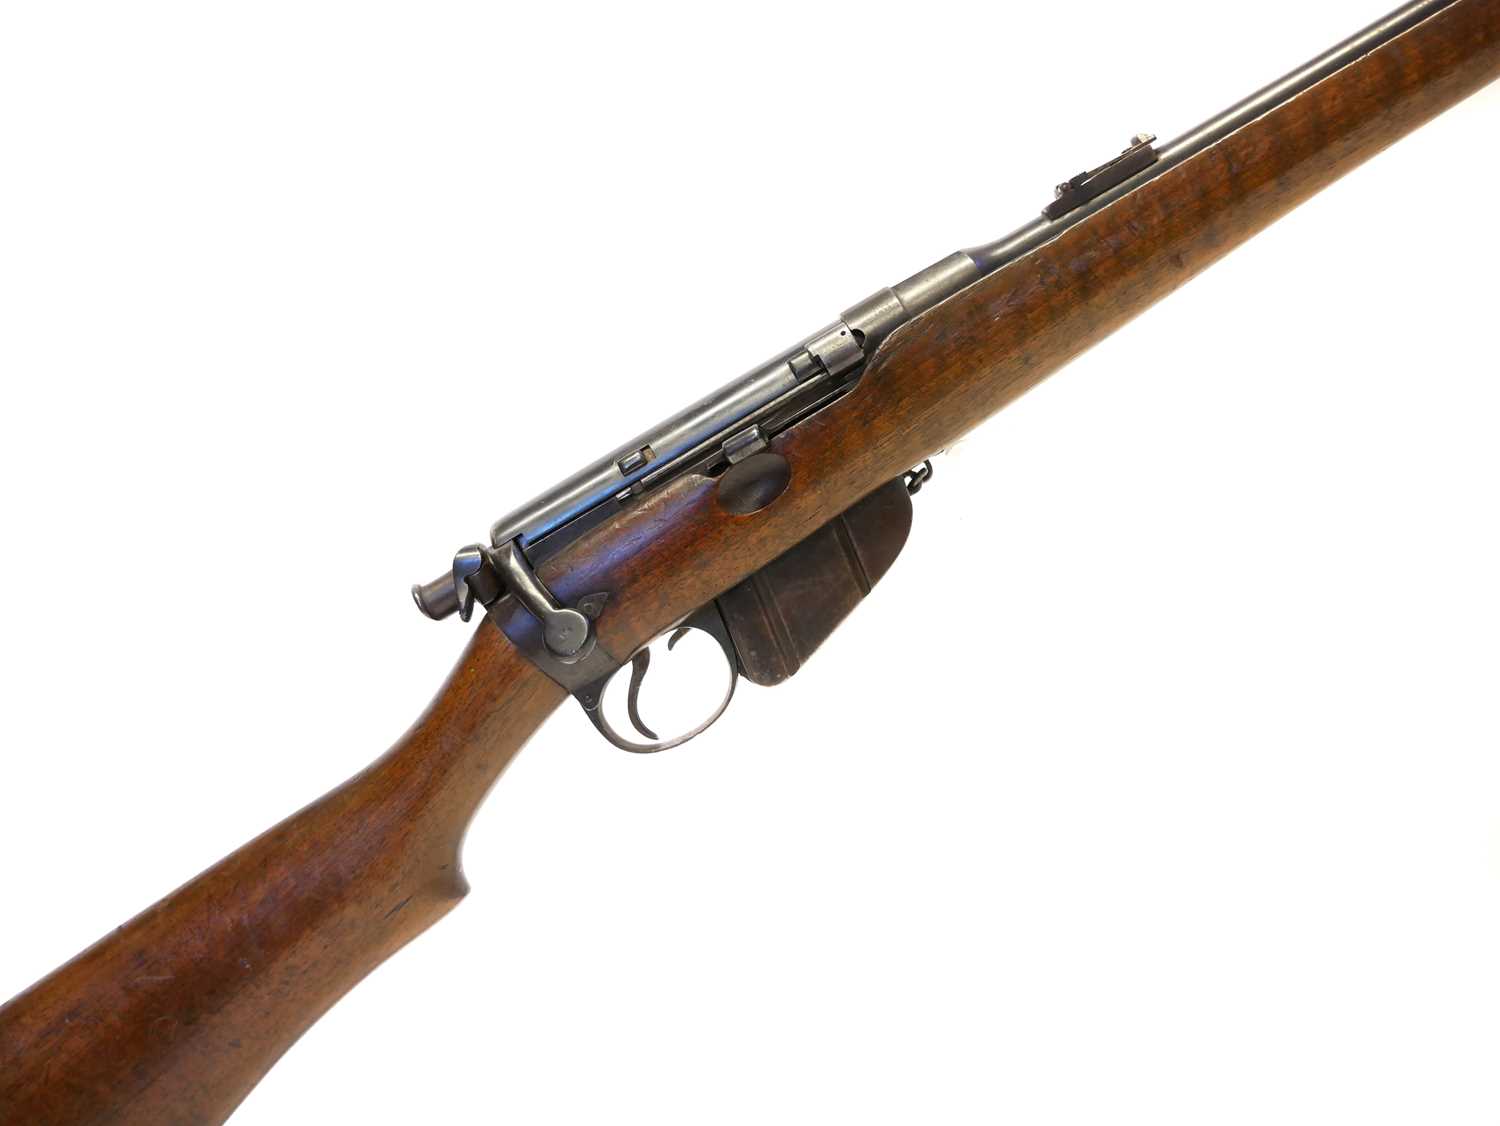 Lee Speed .303 bolt action Officer's private purchase short rifle, serial number 09703, 21inch